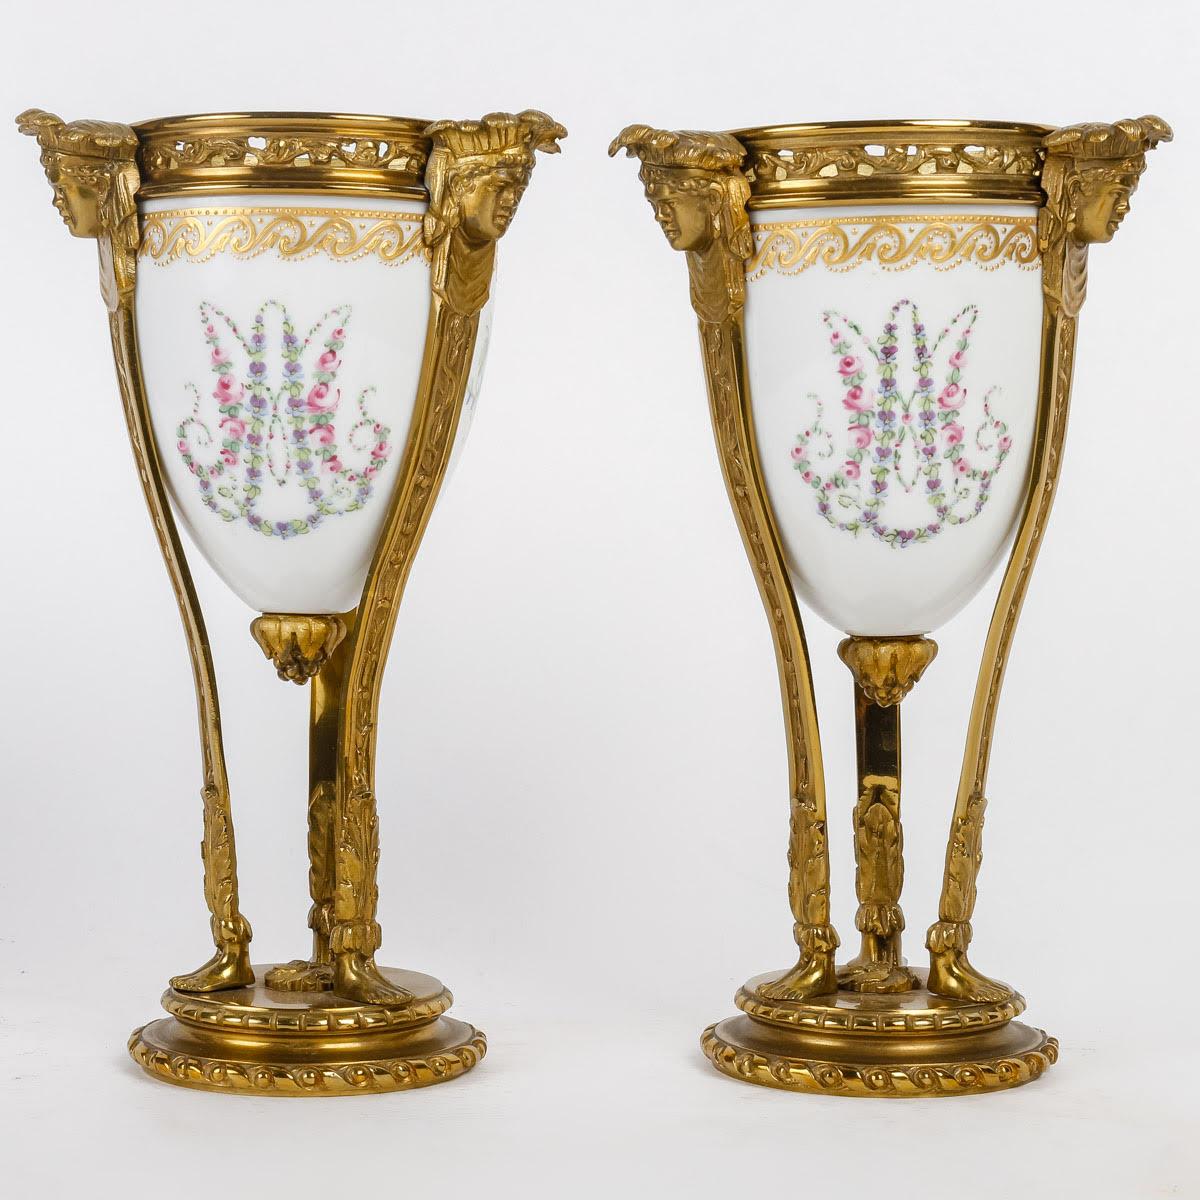 Pair of Perfume Burners from the Manufacture de Sèvres, Early 20th Century. 1